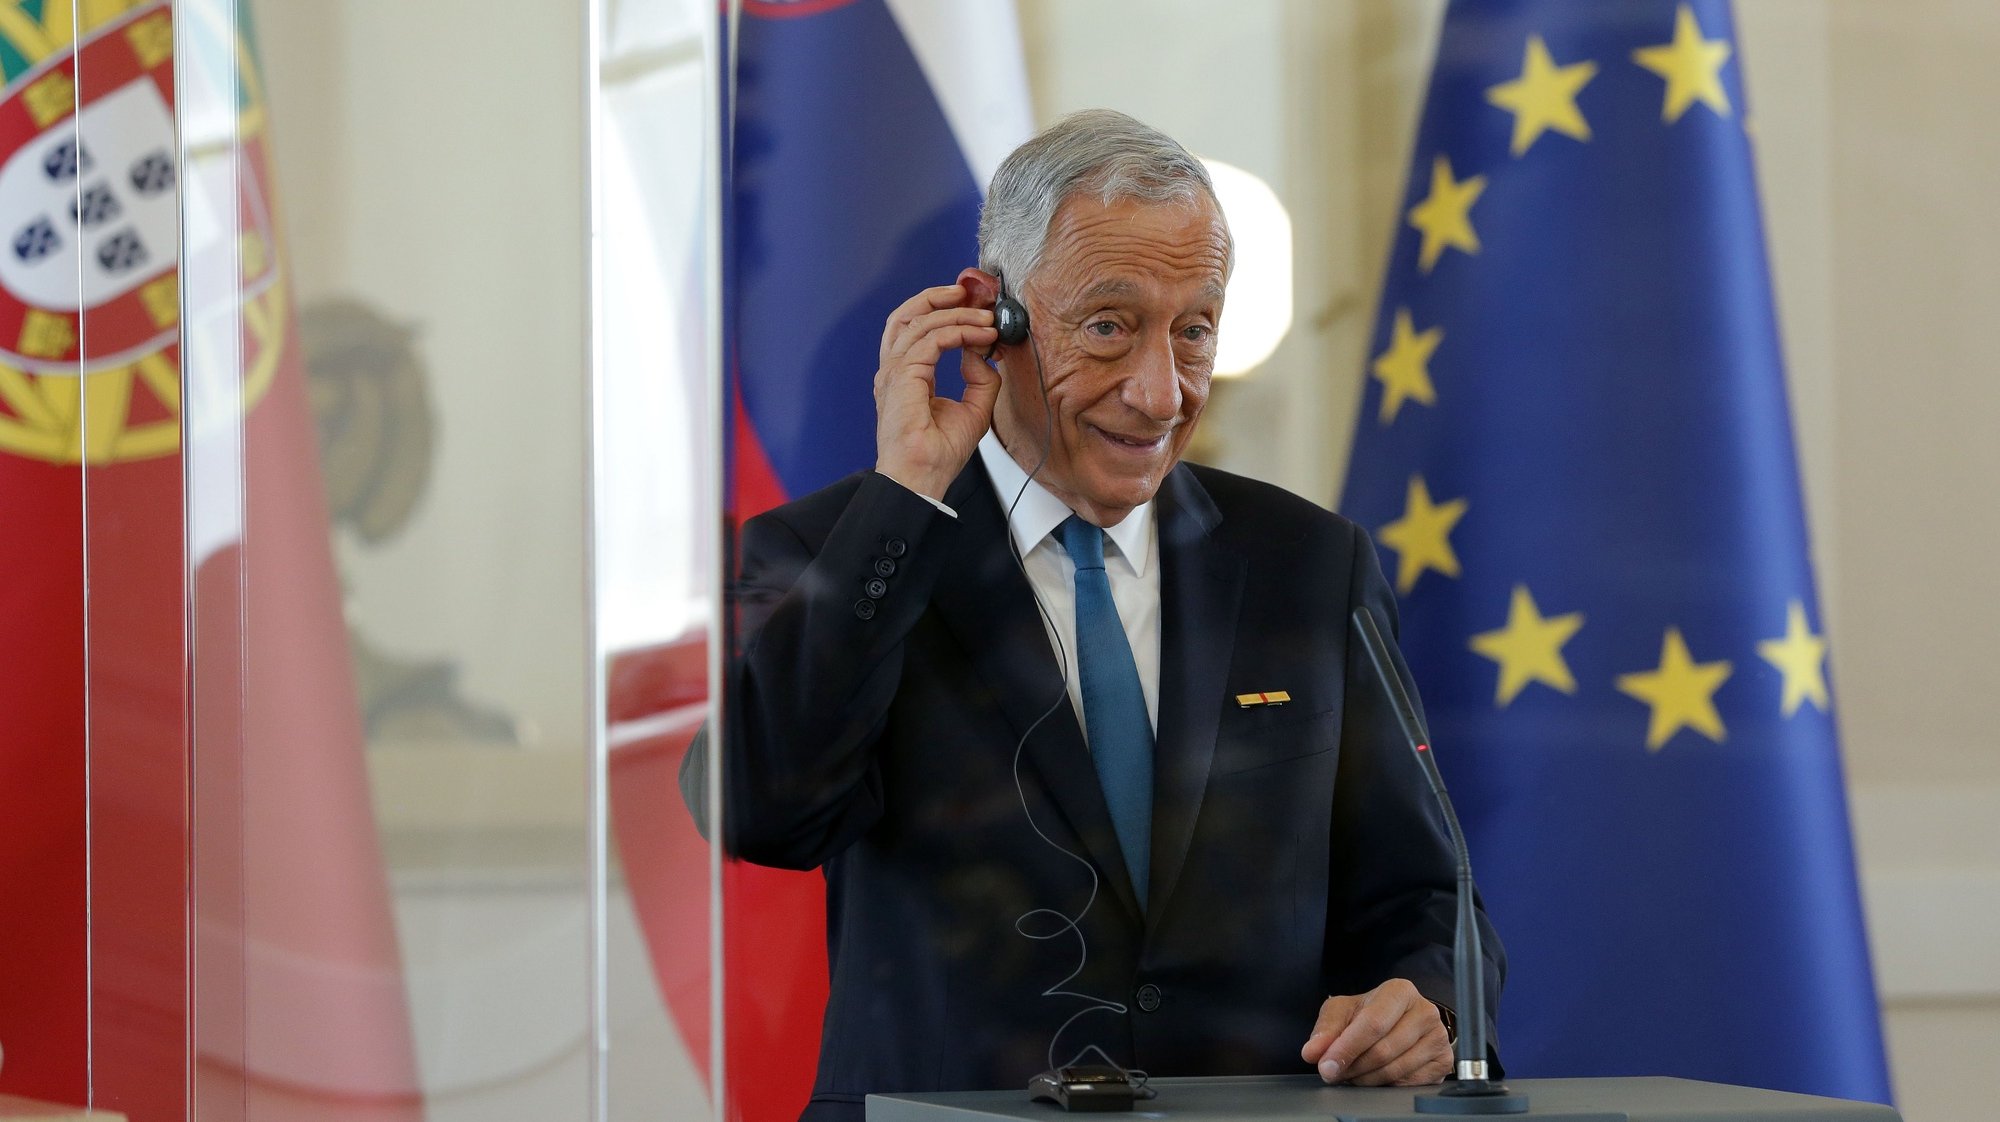 The President of Portugal, Marcelo Rebelo de Sousa during a joint press conference at the Presidential Palace in Ljubljana, Slovenia, 31 May 2021. Marcelo Rebelo de Sousa is on an official visit to Slovenia between Sunday and Tuesday, and will then head to Bulgaria. ESTELA SILVA/LUSA